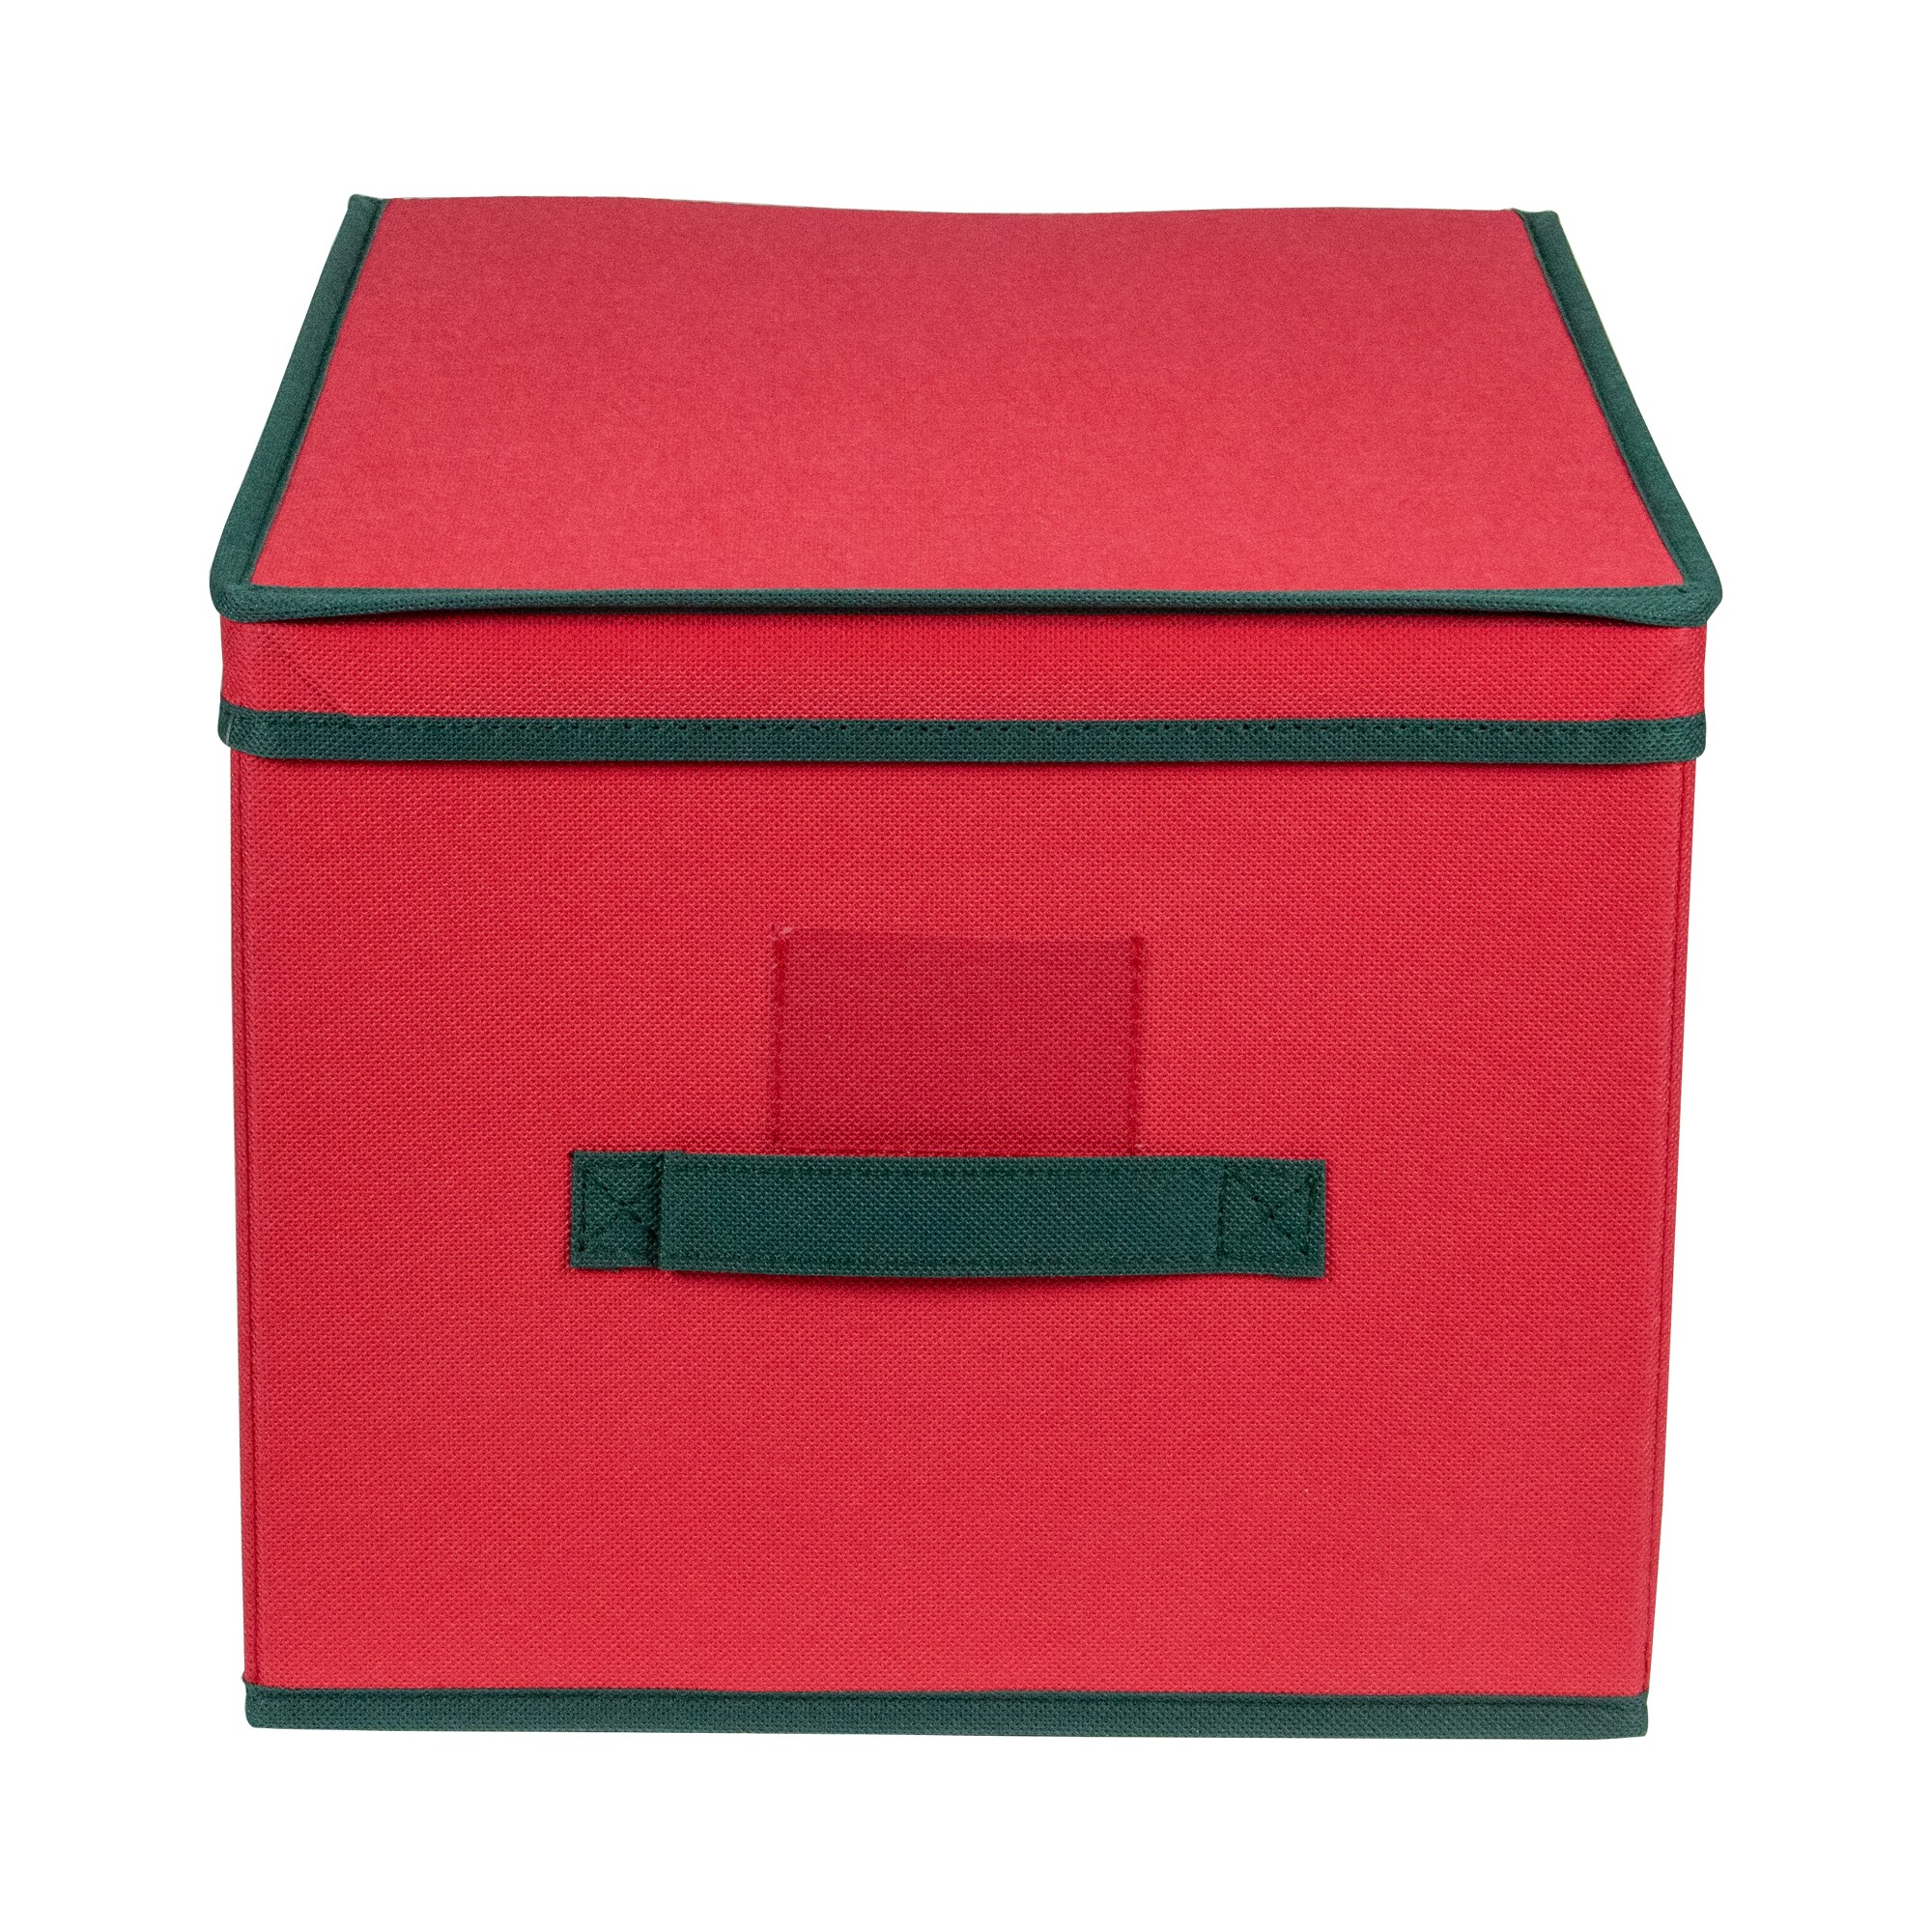 510148-S Ornament Storage Tub-Red-Holds 48 Ornaments-LOT OF 2 